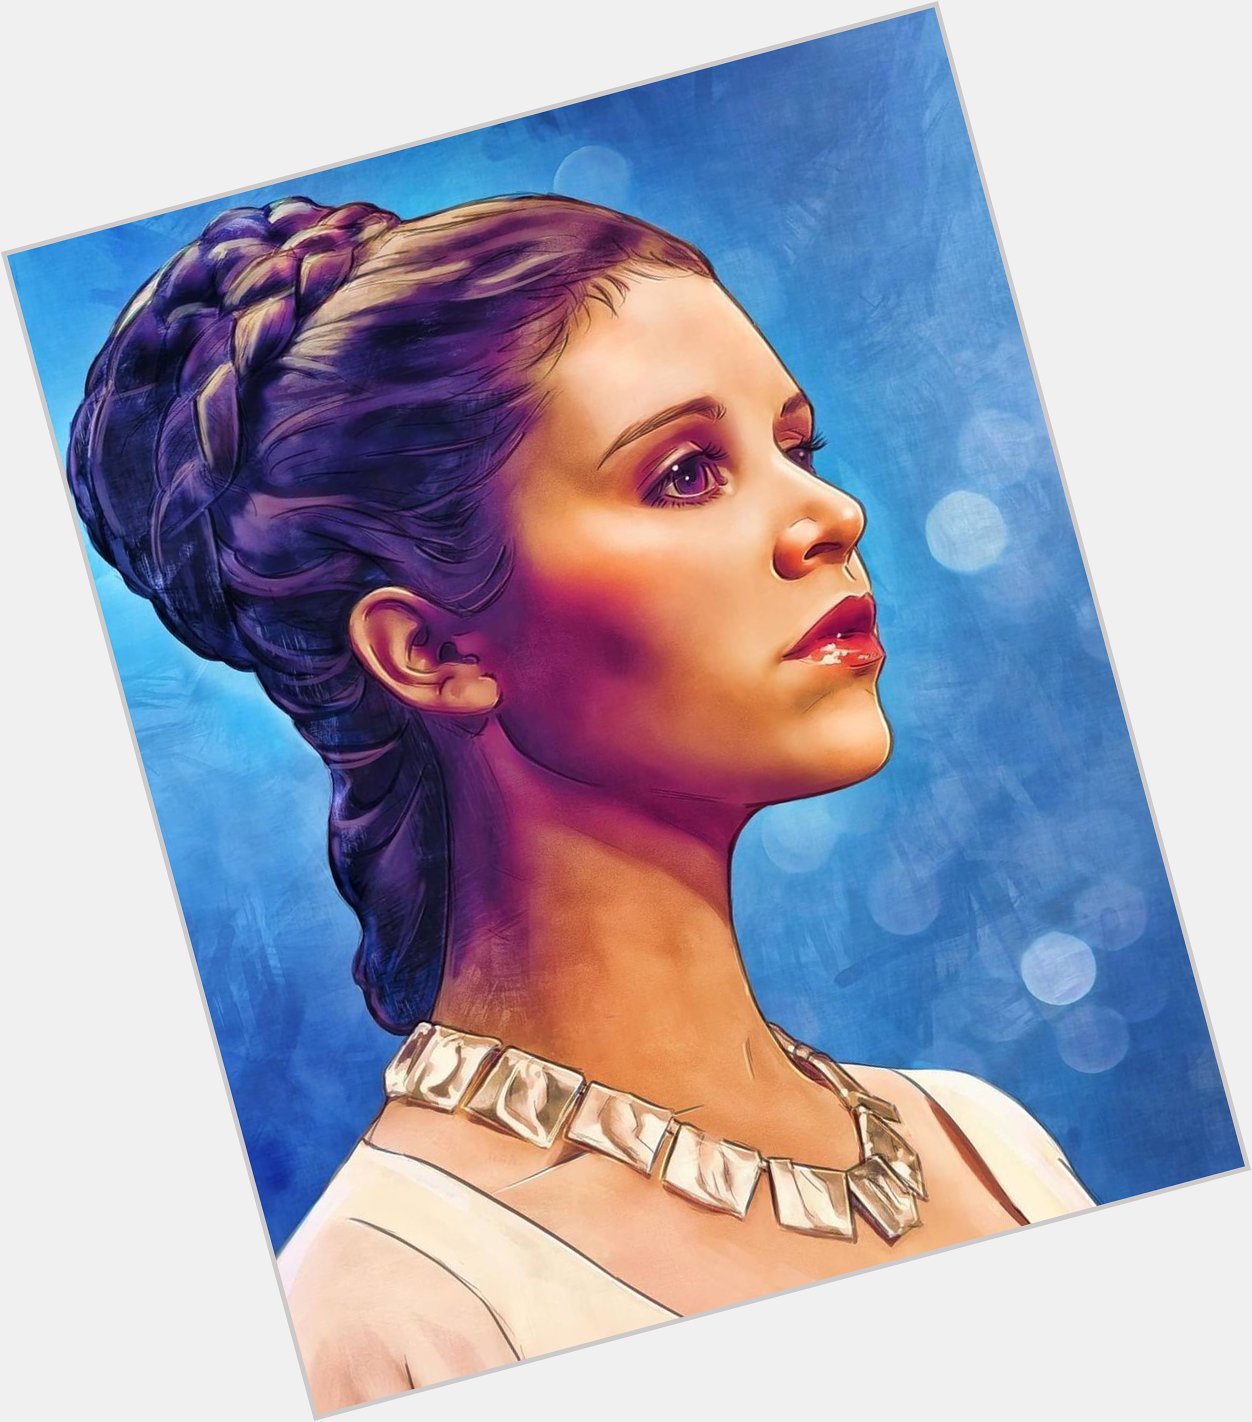 Leia. 
Happy Birthday to our Princess Carrie Fisher.
Art by Daia 